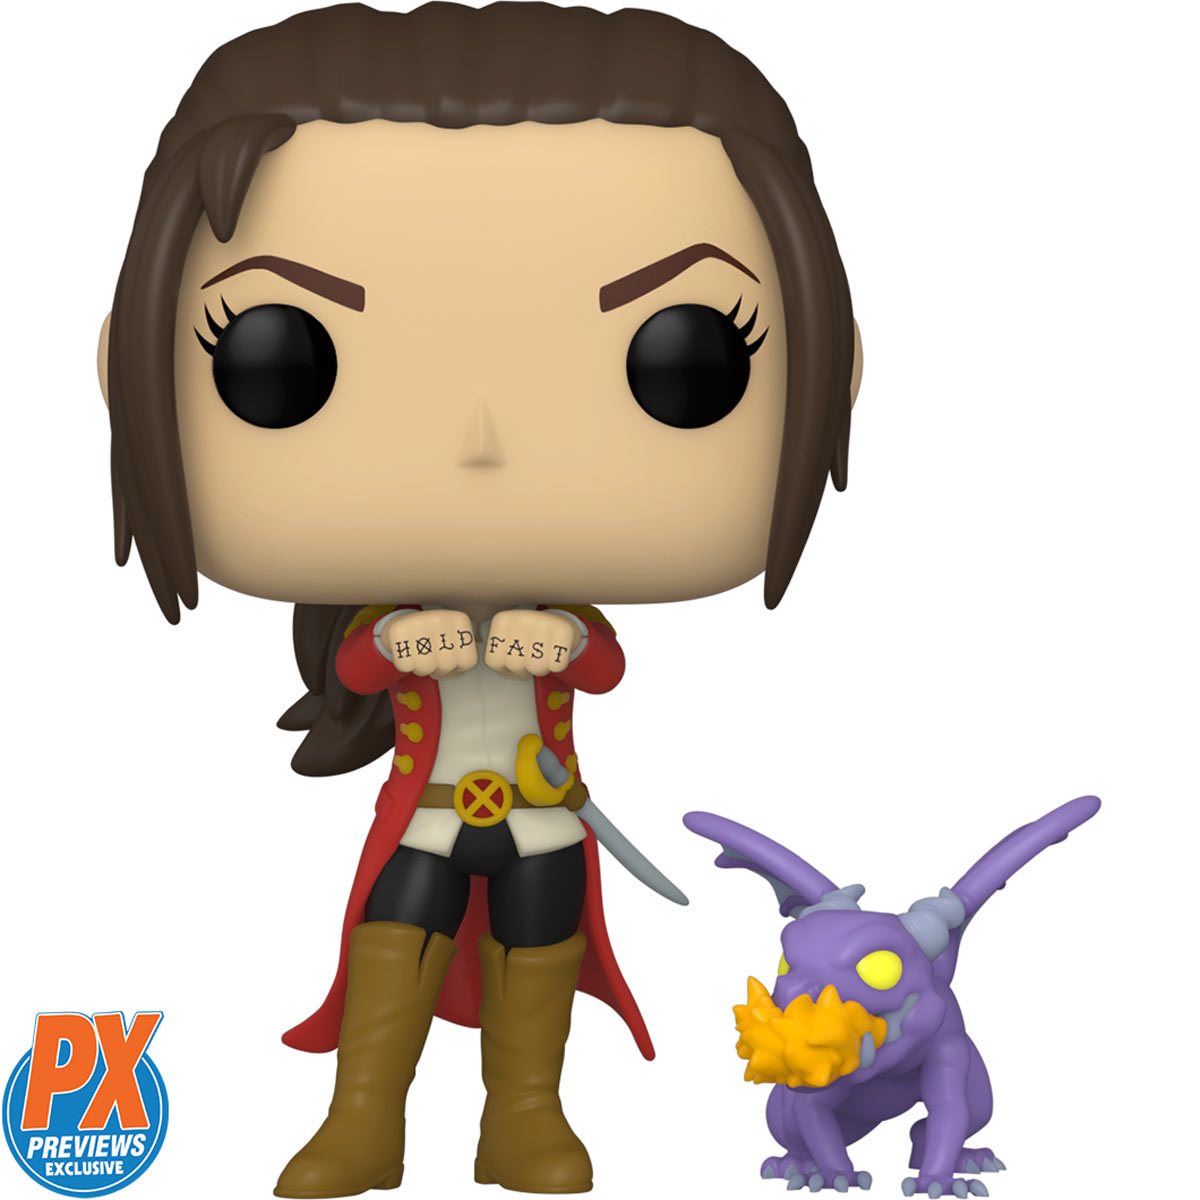 Funko POP! Marvel - X-Men Kate Pryde with Lockheed and Buddy (Previews Exclusive)